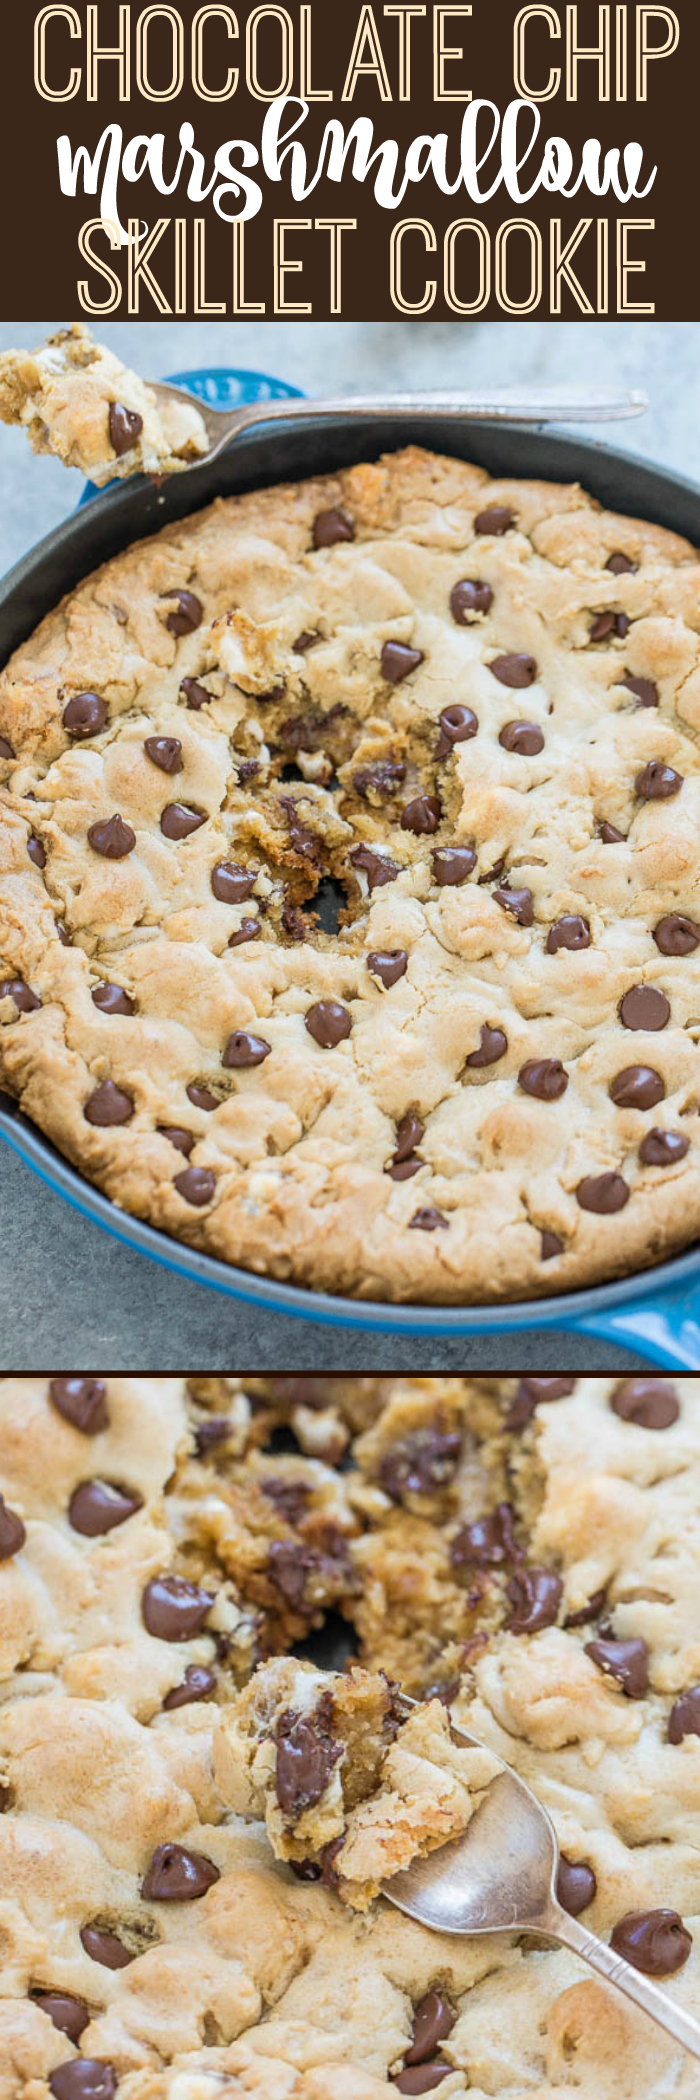 Chocolate Chip Marshmallow Skillet Cookie - Bigger is BETTER when it comes to cookies!! Soft center, chewy edges, loaded with gooey marshmallows and CHOCOLATE! Easy, no mixer recipe you must try!!